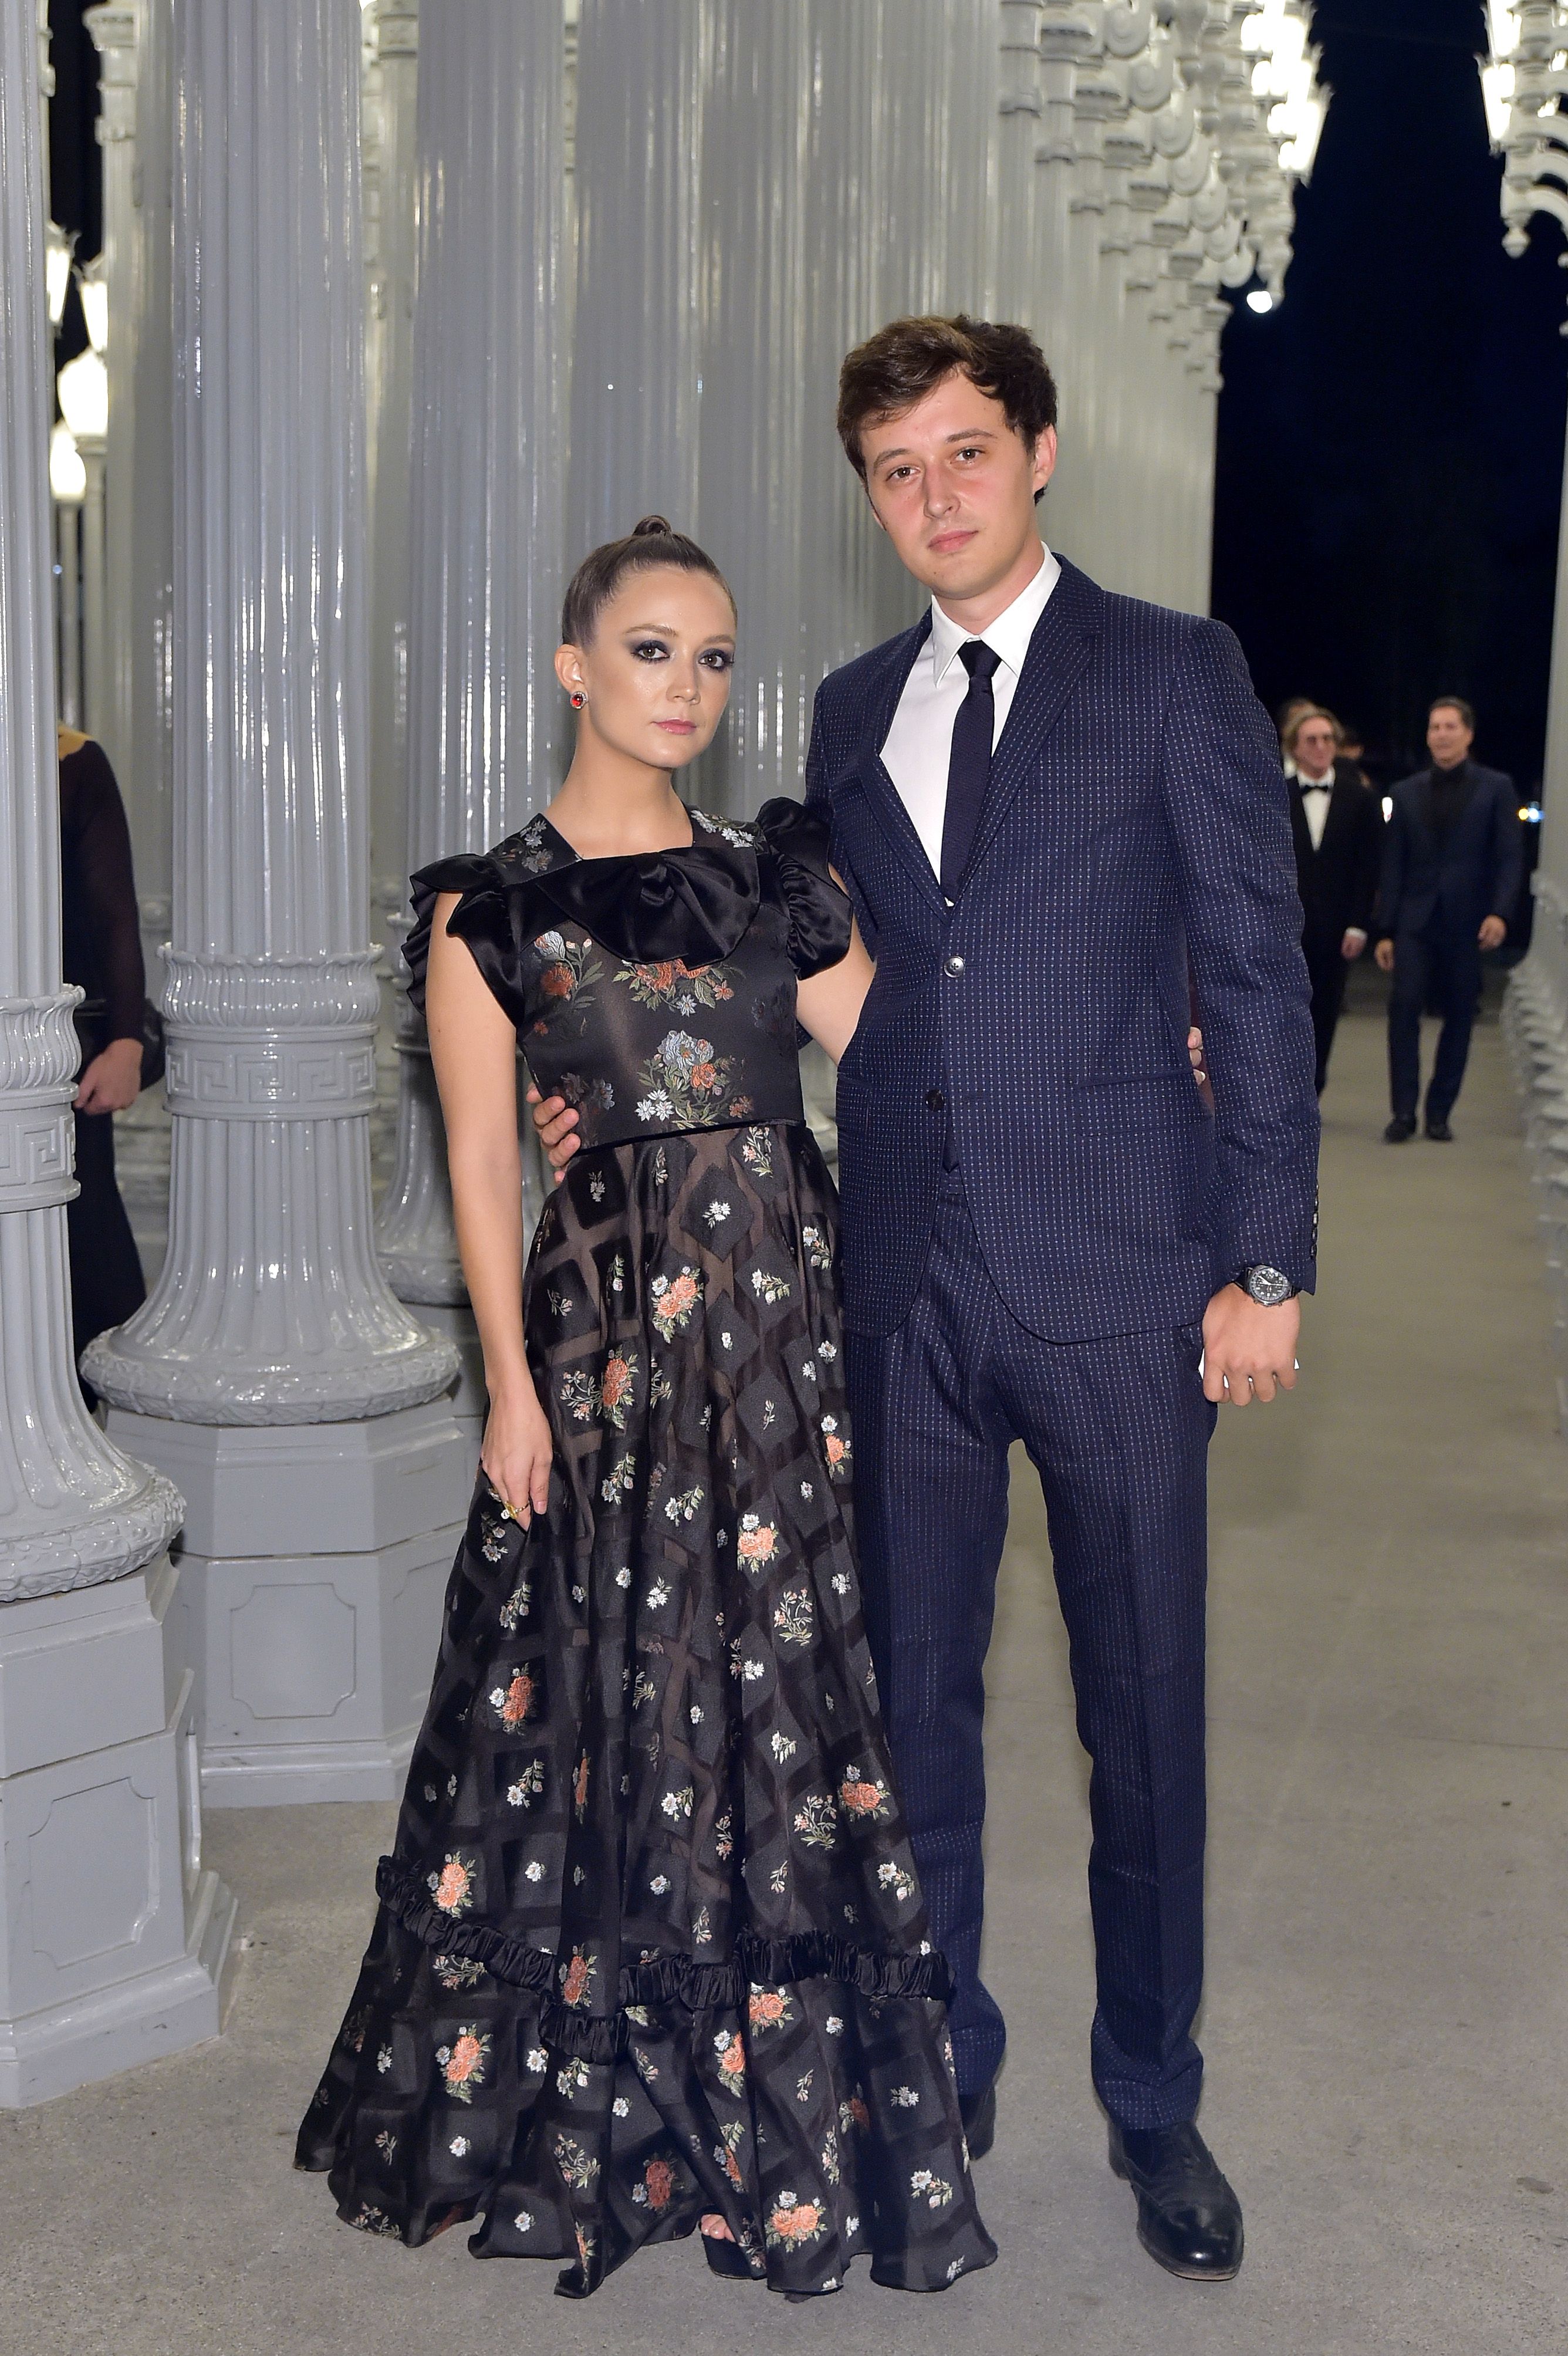 Austen Rydell with his beautiful fiance, Billie Lourd.